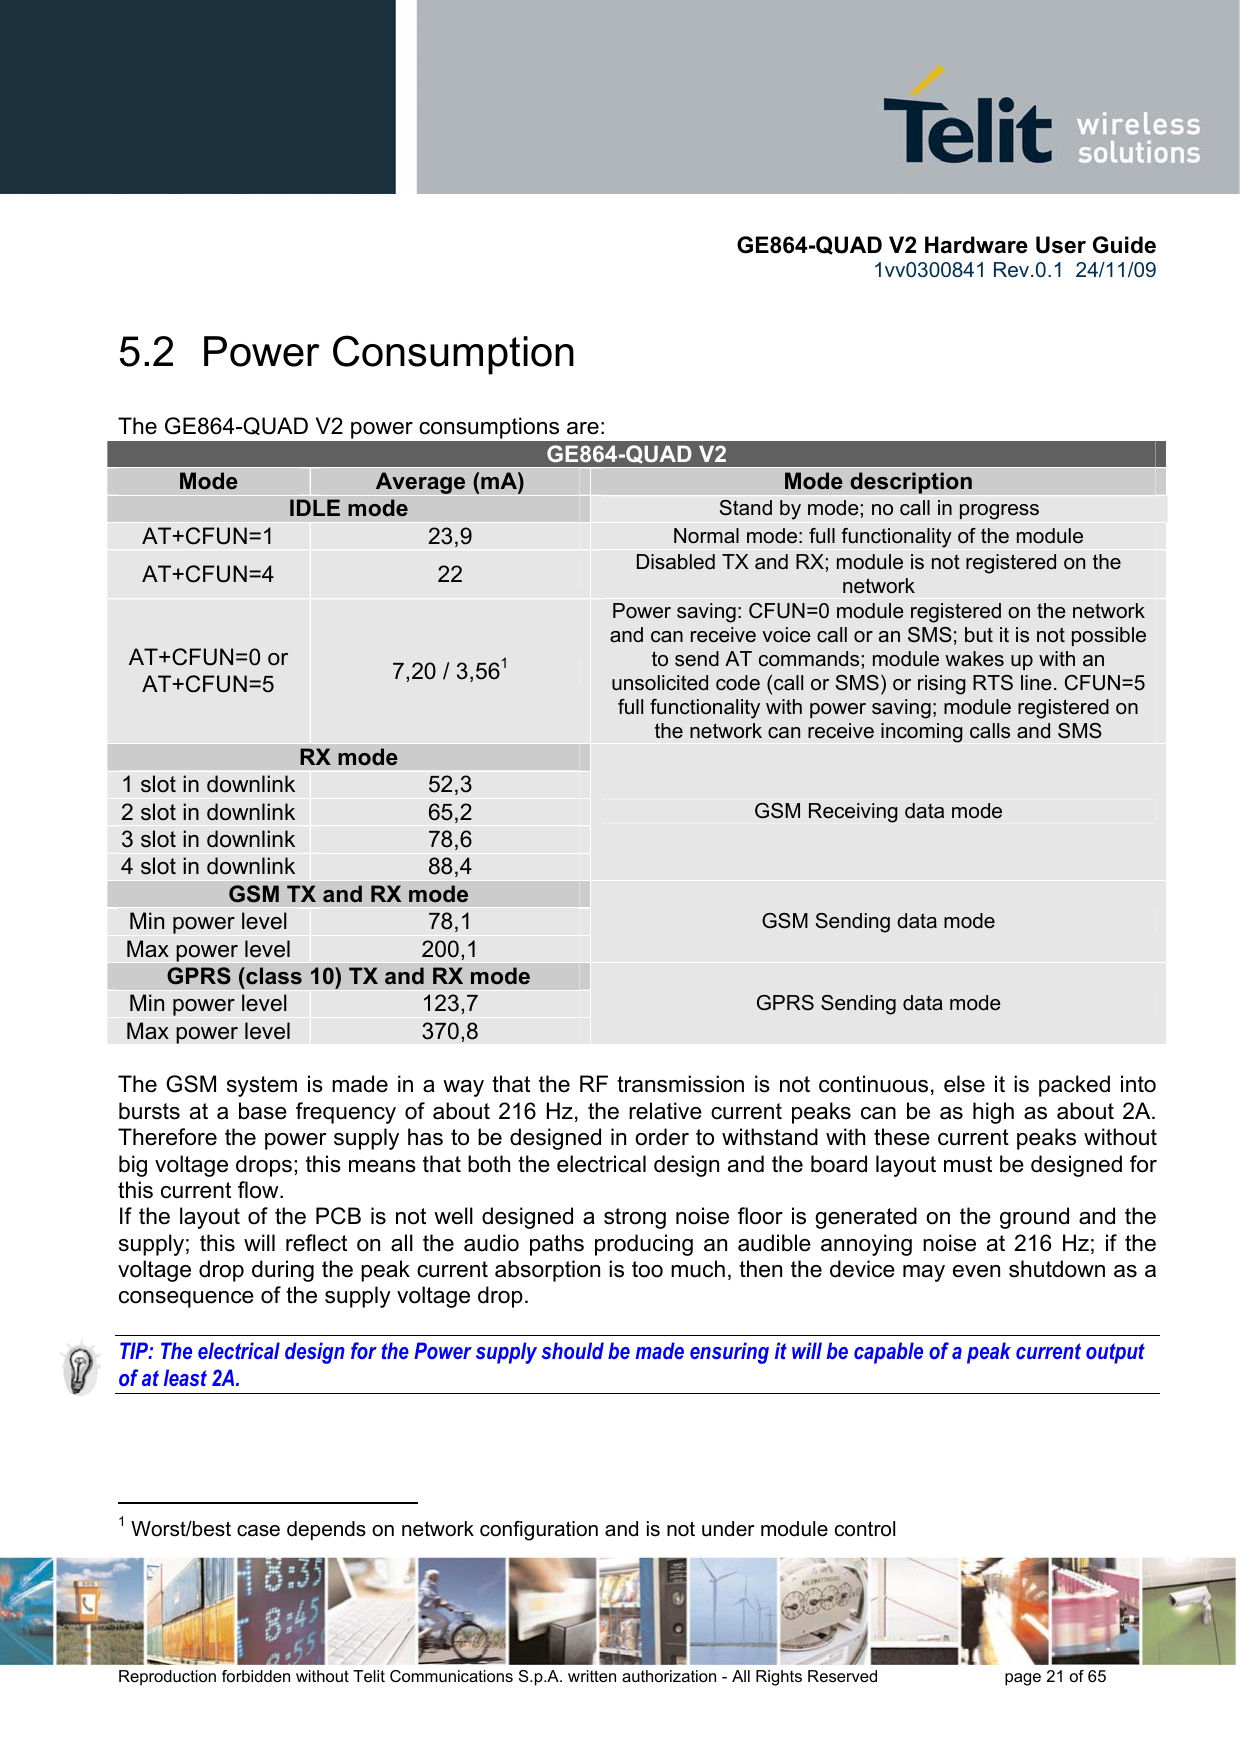       GE864-QUAD V2 Hardware User Guide 1vv0300841 Rev.0.1  24/11/09      Reproduction forbidden without Telit Communications S.p.A. written authorization - All Rights Reserved    page 21 of 65  5.2  Power Consumption The GE864-QUAD V2 power consumptions are:  GE864-QUAD V2 Mode   Average (mA)  Mode description IDLE mode  Stand by mode; no call in progress AT+CFUN=1  23,9  Normal mode: full functionality of the module AT+CFUN=4  22  Disabled TX and RX; module is not registered on the network AT+CFUN=0 or AT+CFUN=5  7,20 / 3,561 Power saving: CFUN=0 module registered on the network and can receive voice call or an SMS; but it is not possible to send AT commands; module wakes up with an unsolicited code (call or SMS) or rising RTS line. CFUN=5 full functionality with power saving; module registered on the network can receive incoming calls and SMS  RX mode 1 slot in downlink  52,3 2 slot in downlink  65,2 3 slot in downlink  78,6 4 slot in downlink  88,4 GSM Receiving data mode GSM TX and RX mode  Min power level  78,1 Max power level  200,1 GSM Sending data mode GPRS (class 10) TX and RX mode  Min power level  123,7 Max power level  370,8 GPRS Sending data mode  The GSM system is made in a way that the RF transmission is not continuous, else it is packed into bursts at a base frequency of about 216 Hz, the relative current peaks can be as high as about 2A. Therefore the power supply has to be designed in order to withstand with these current peaks without big voltage drops; this means that both the electrical design and the board layout must be designed for this current flow. If the layout of the PCB is not well designed a strong noise floor is generated on the ground and the supply; this will reflect on all the audio paths producing an audible annoying noise at 216 Hz; if the voltage drop during the peak current absorption is too much, then the device may even shutdown as a consequence of the supply voltage drop.  TIP: The electrical design for the Power supply should be made ensuring it will be capable of a peak current output of at least 2A.                                                  1 Worst/best case depends on network configuration and is not under module control  